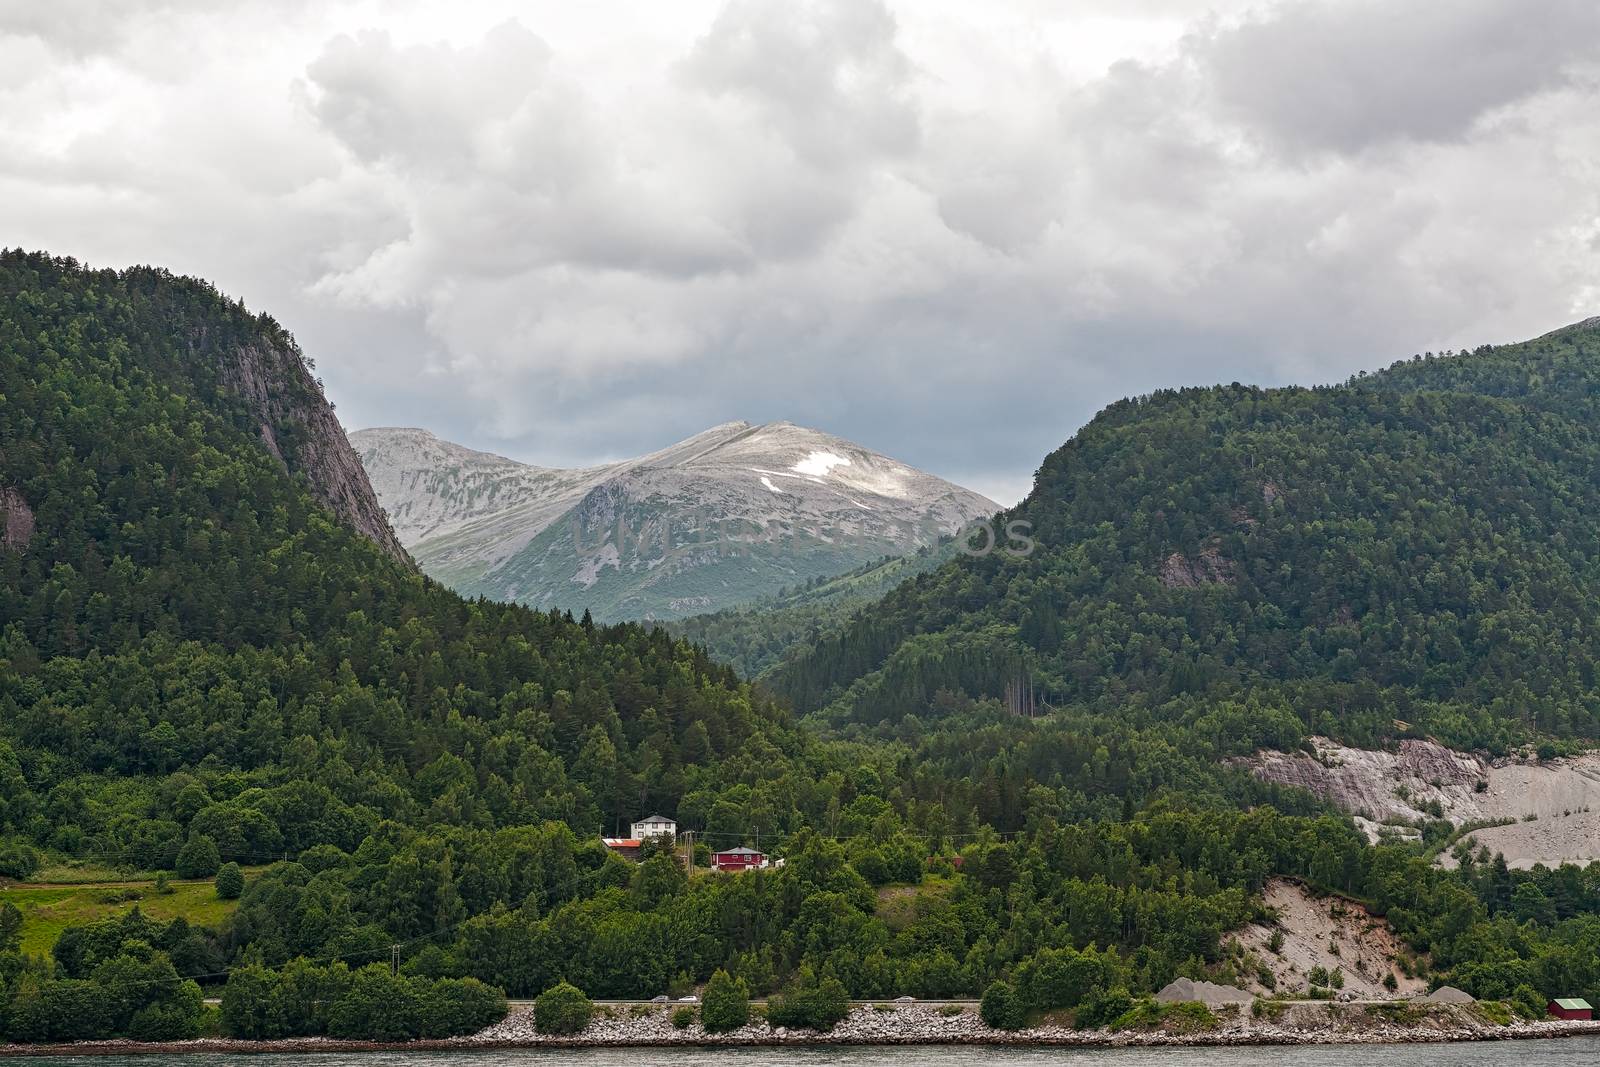 Small houses in the mountains along the Romsdalsfjorden near Andalsnes under a cloudy sky, Norway